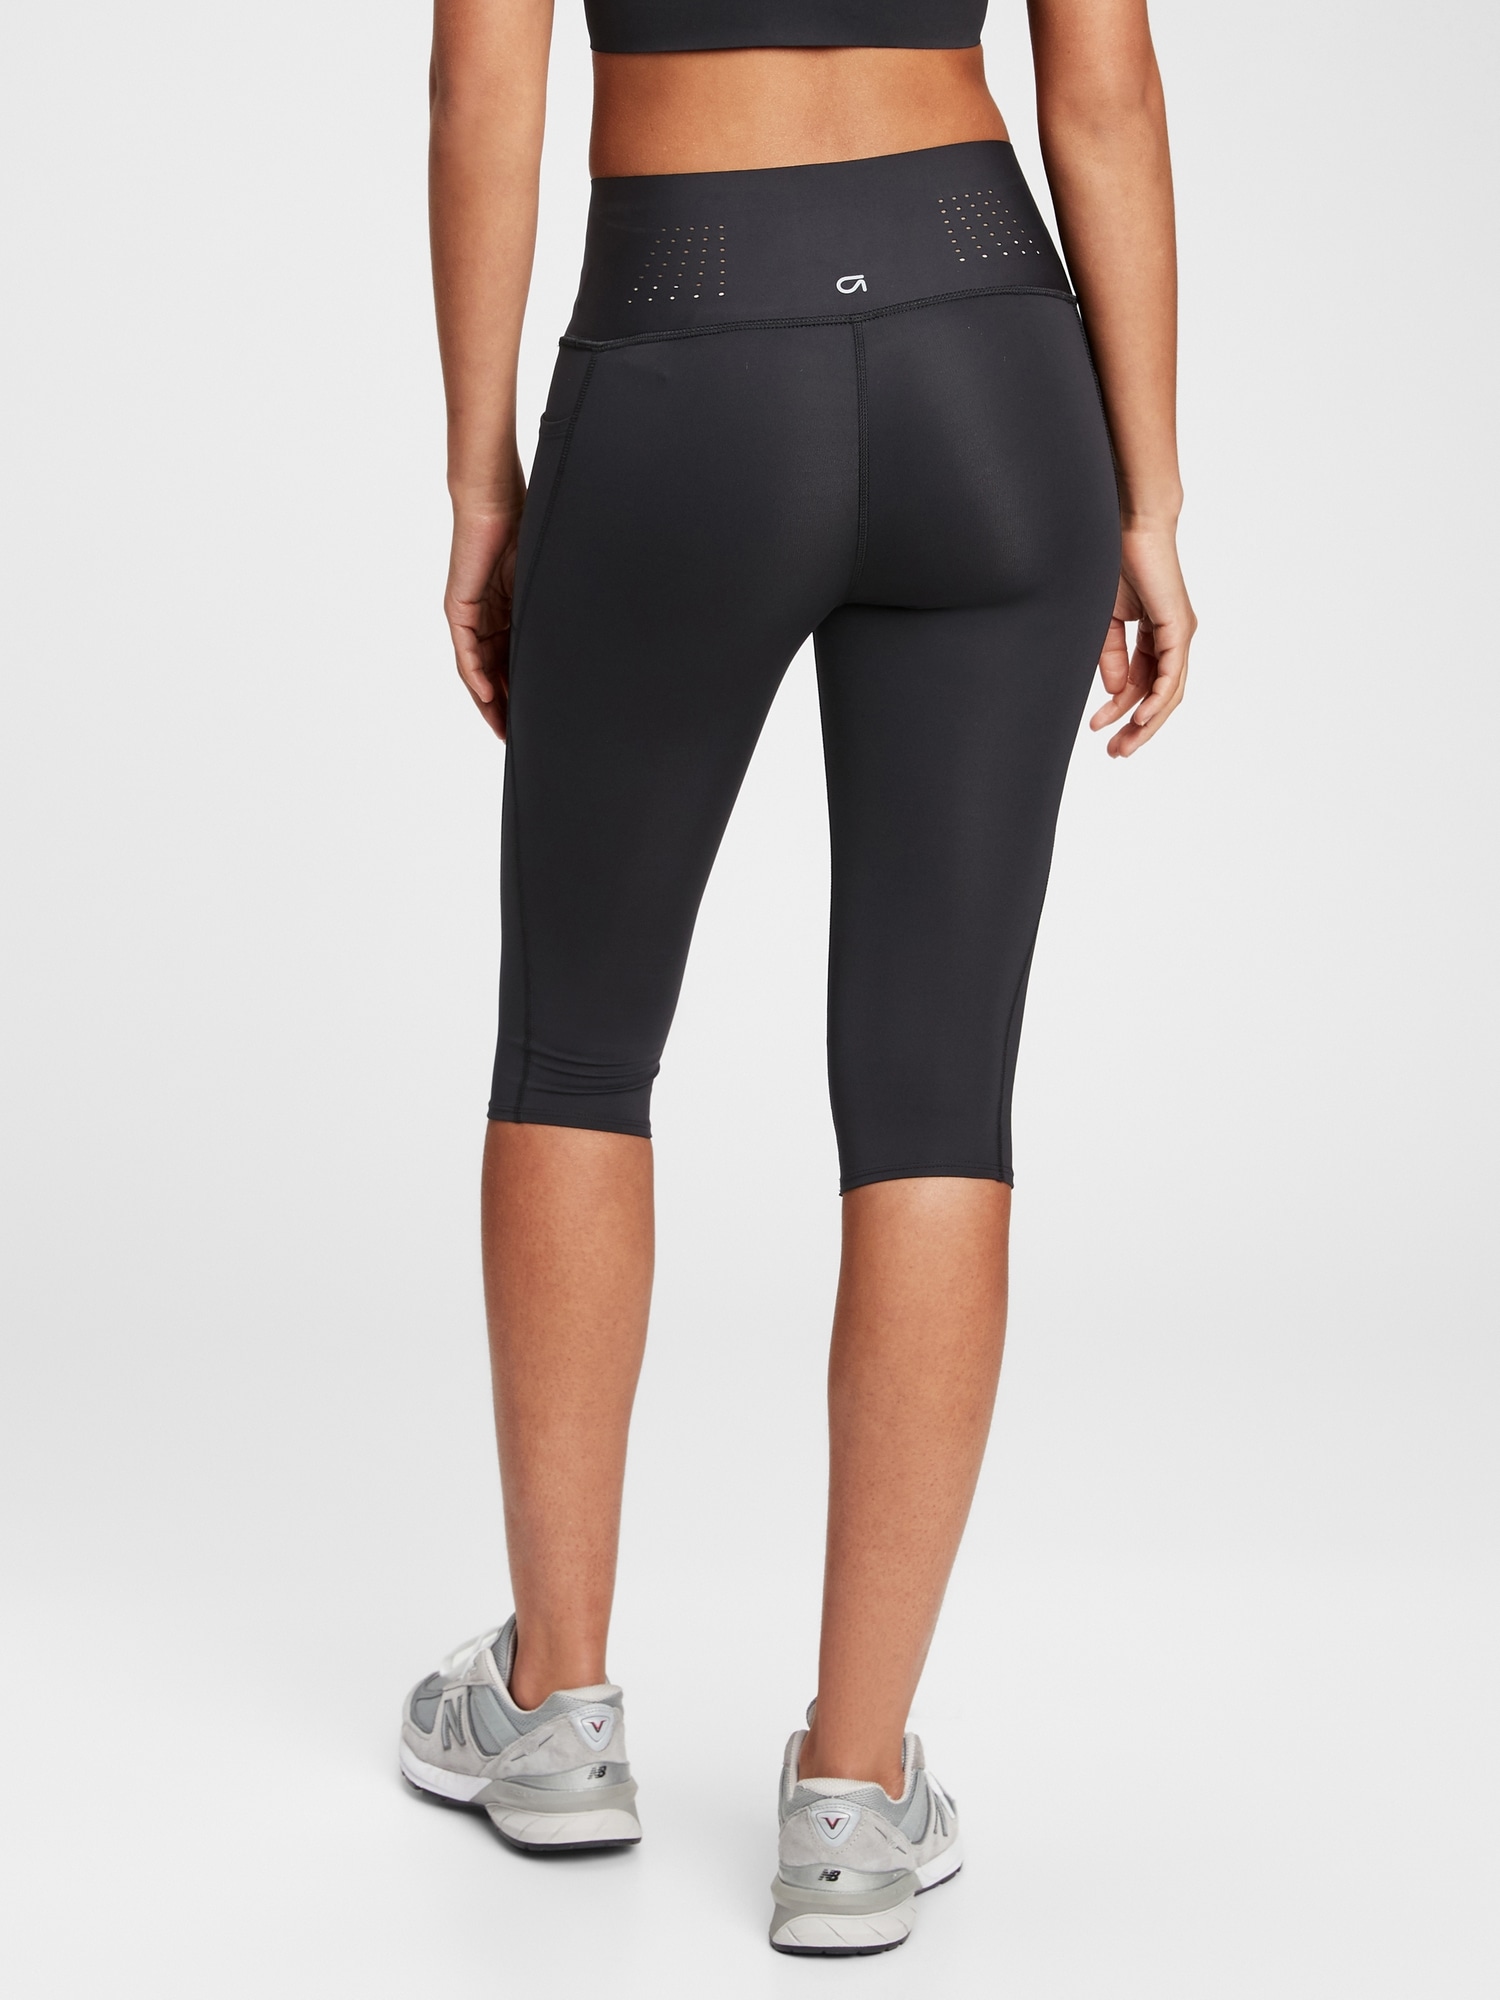 Why I Call These Body Sculpt Leggings a 'Life Revolution' as a